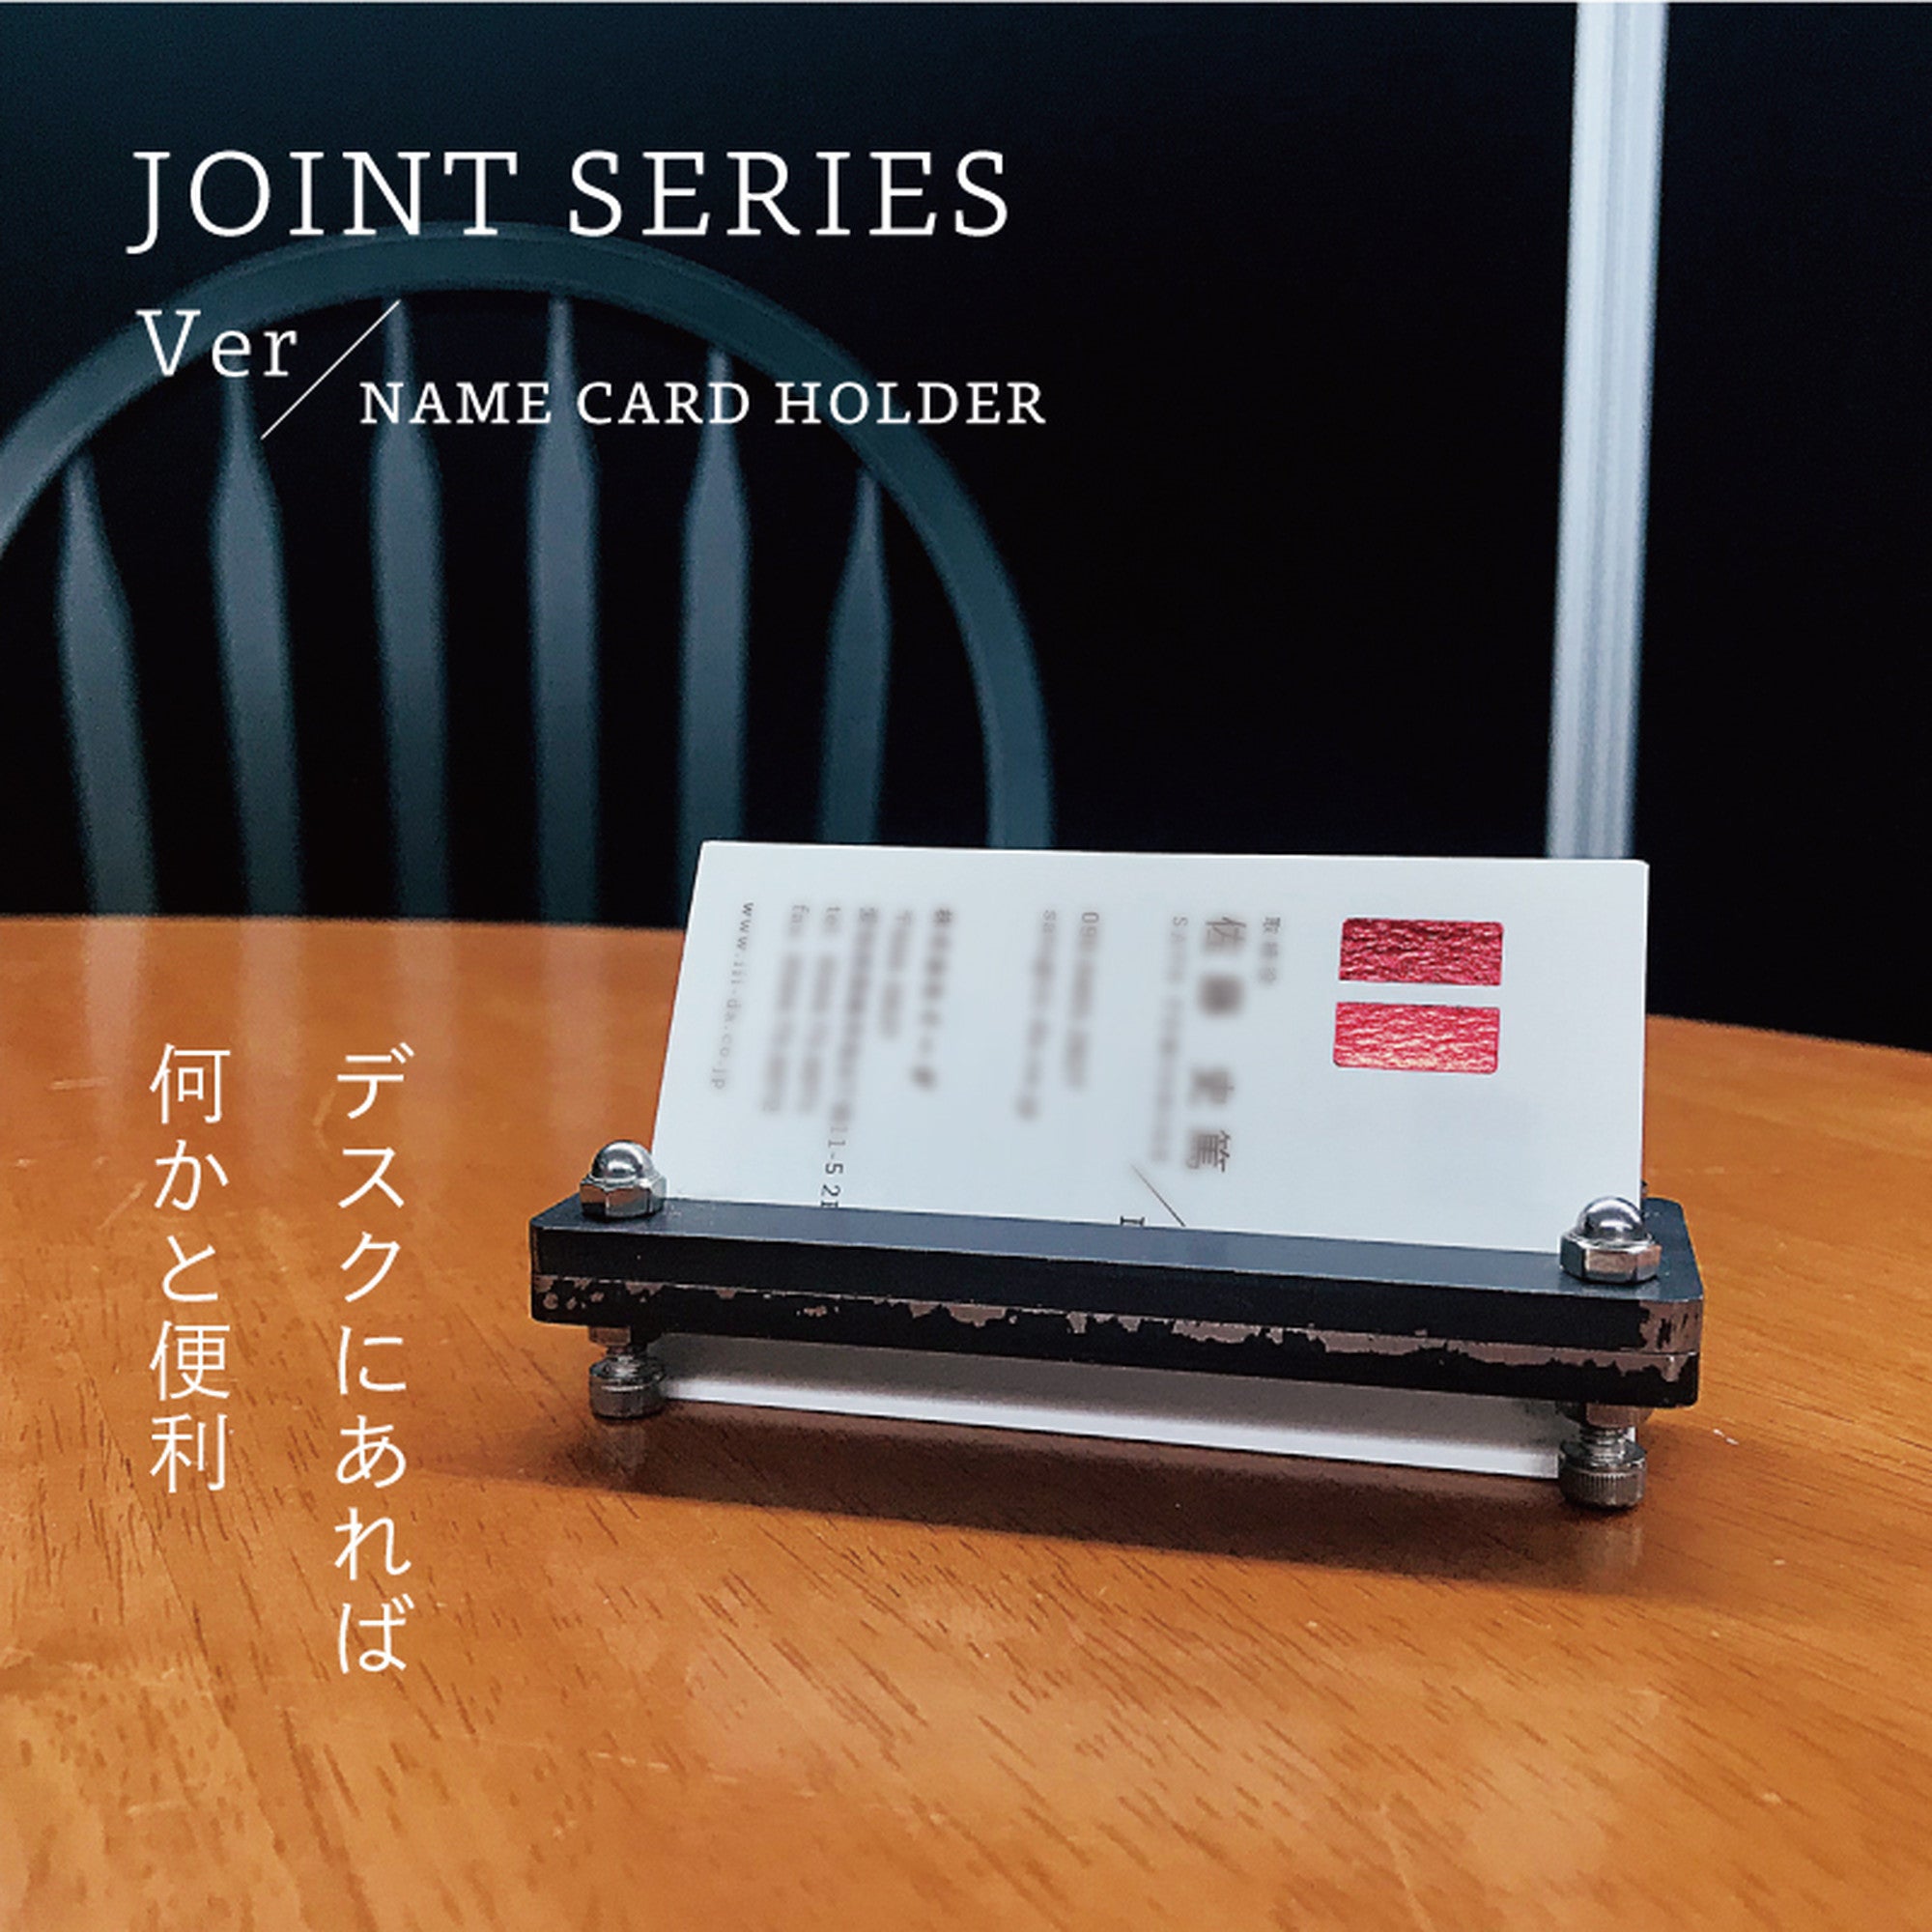 Joint Series Namecard Holder　BOTTOM：アクリル、TOP：酸洗鉄